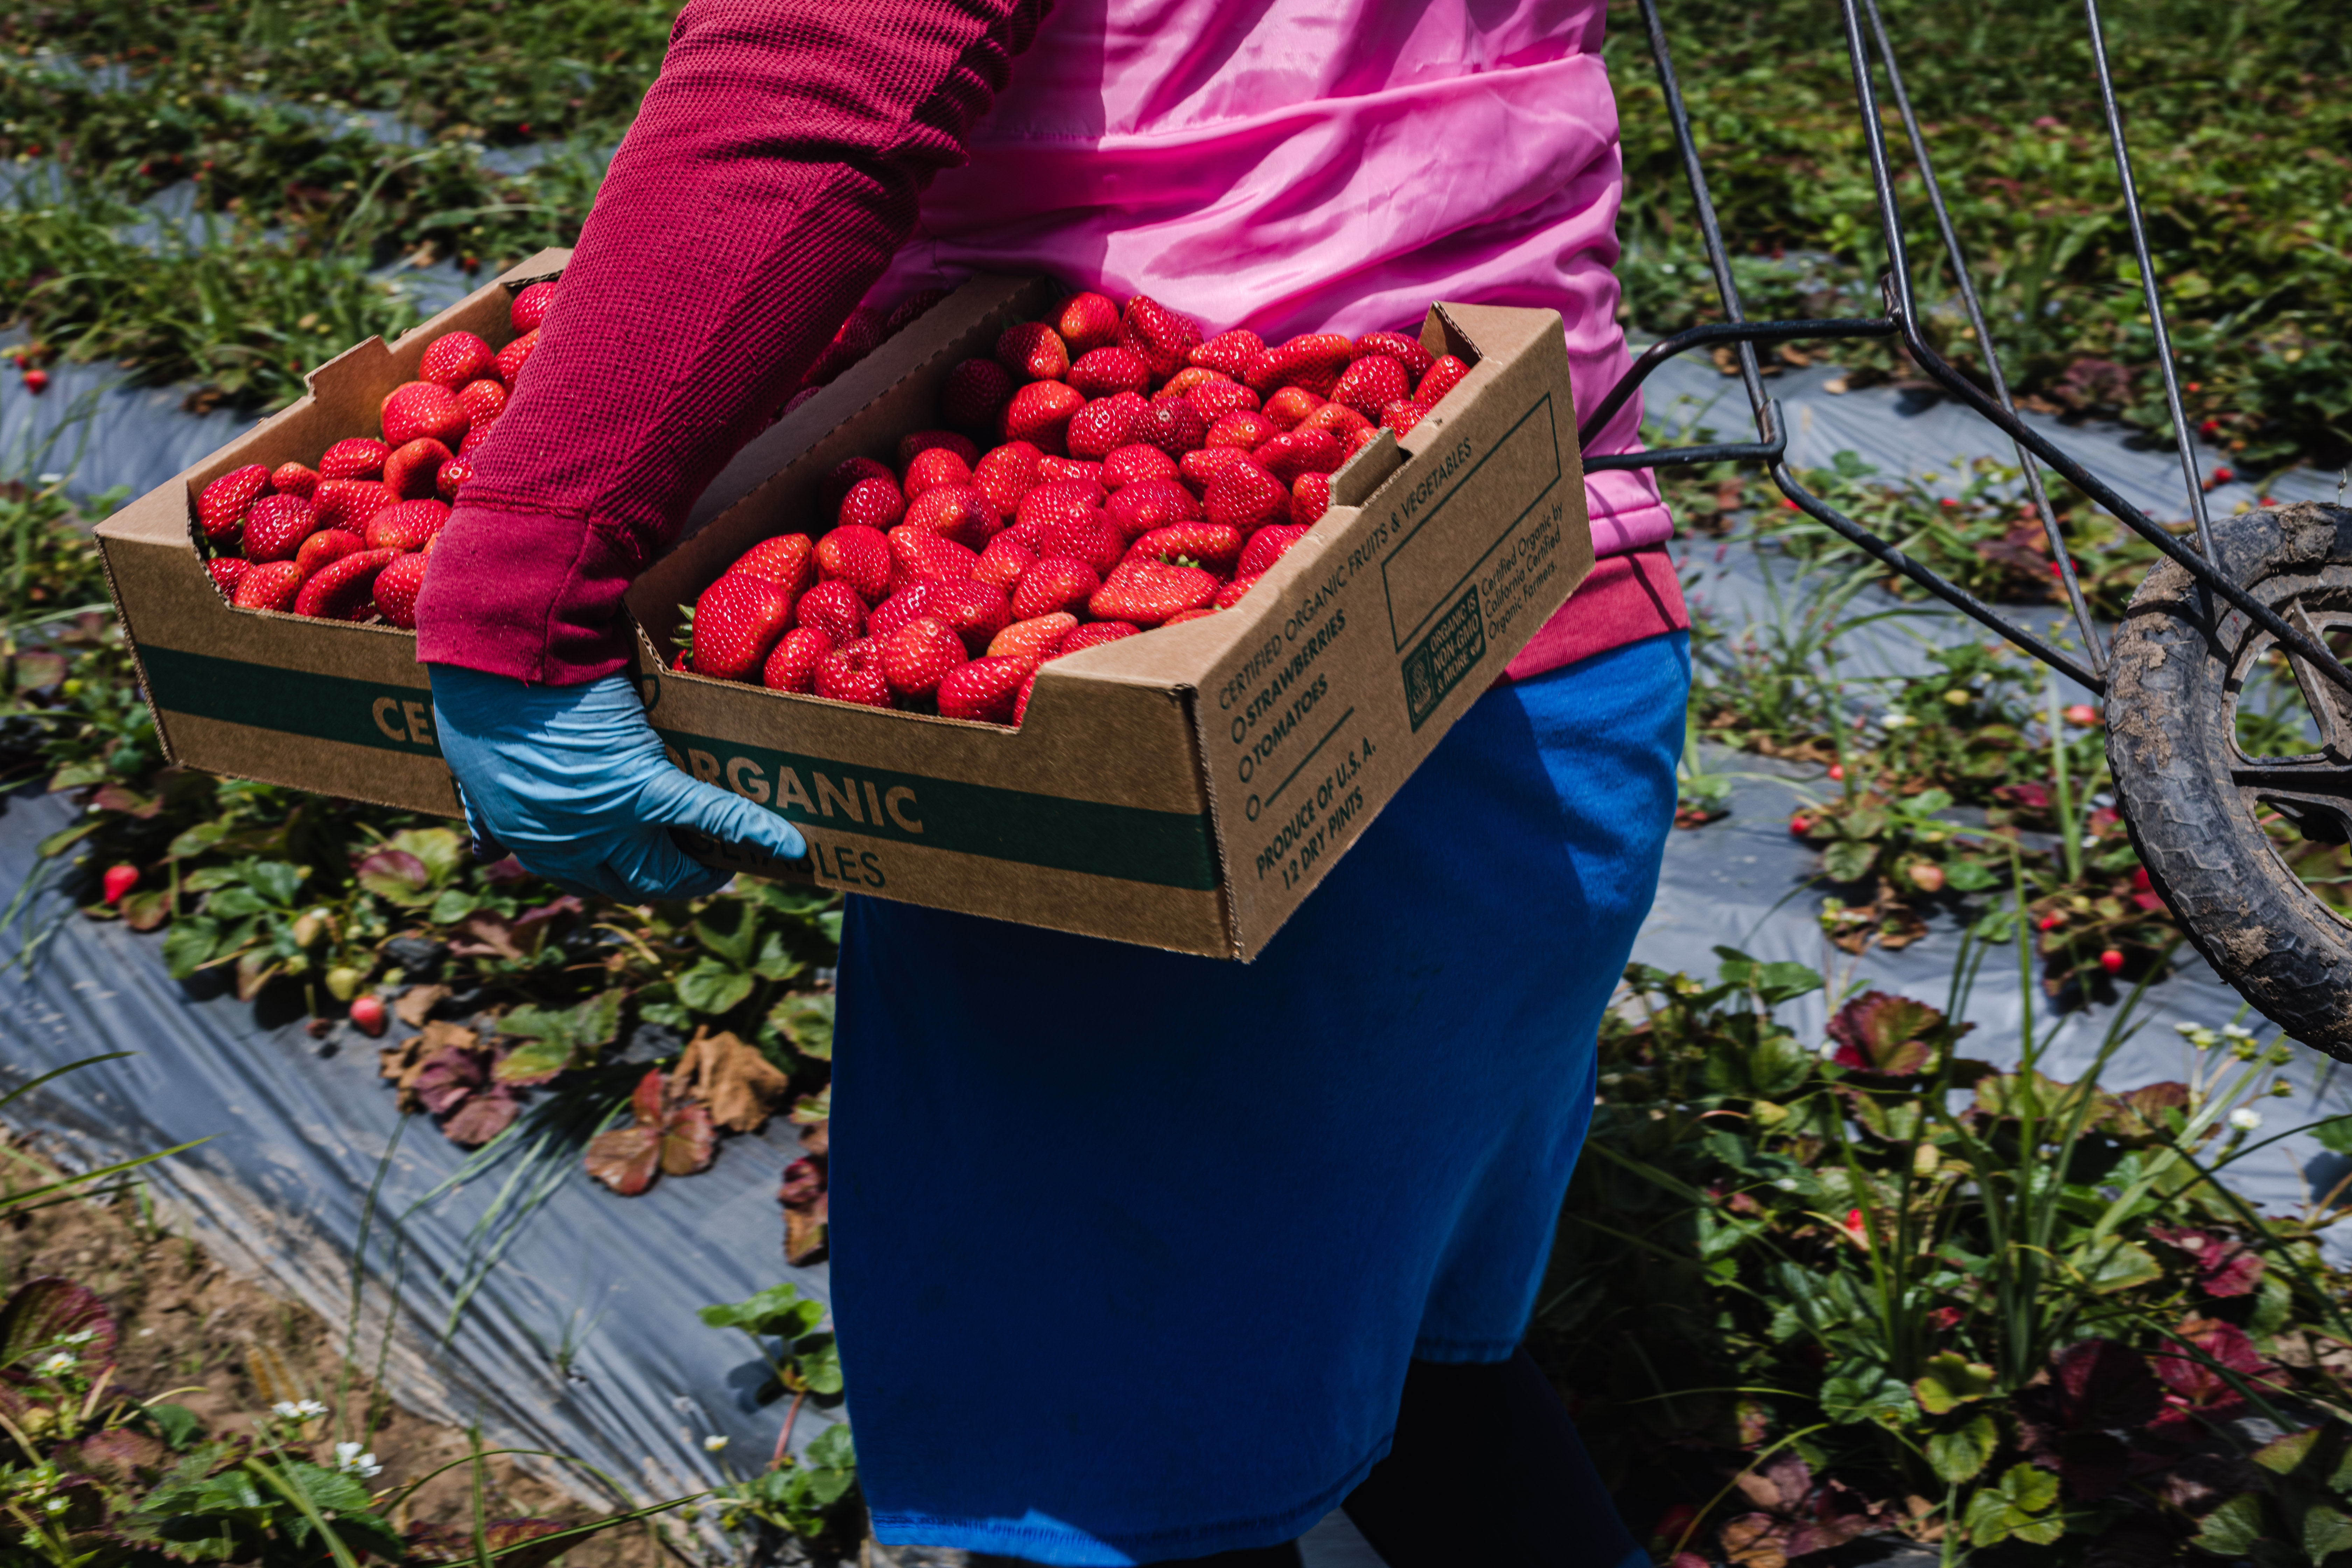 JSM Organics workers carrying the strawberry harvest in cardboard boxes.